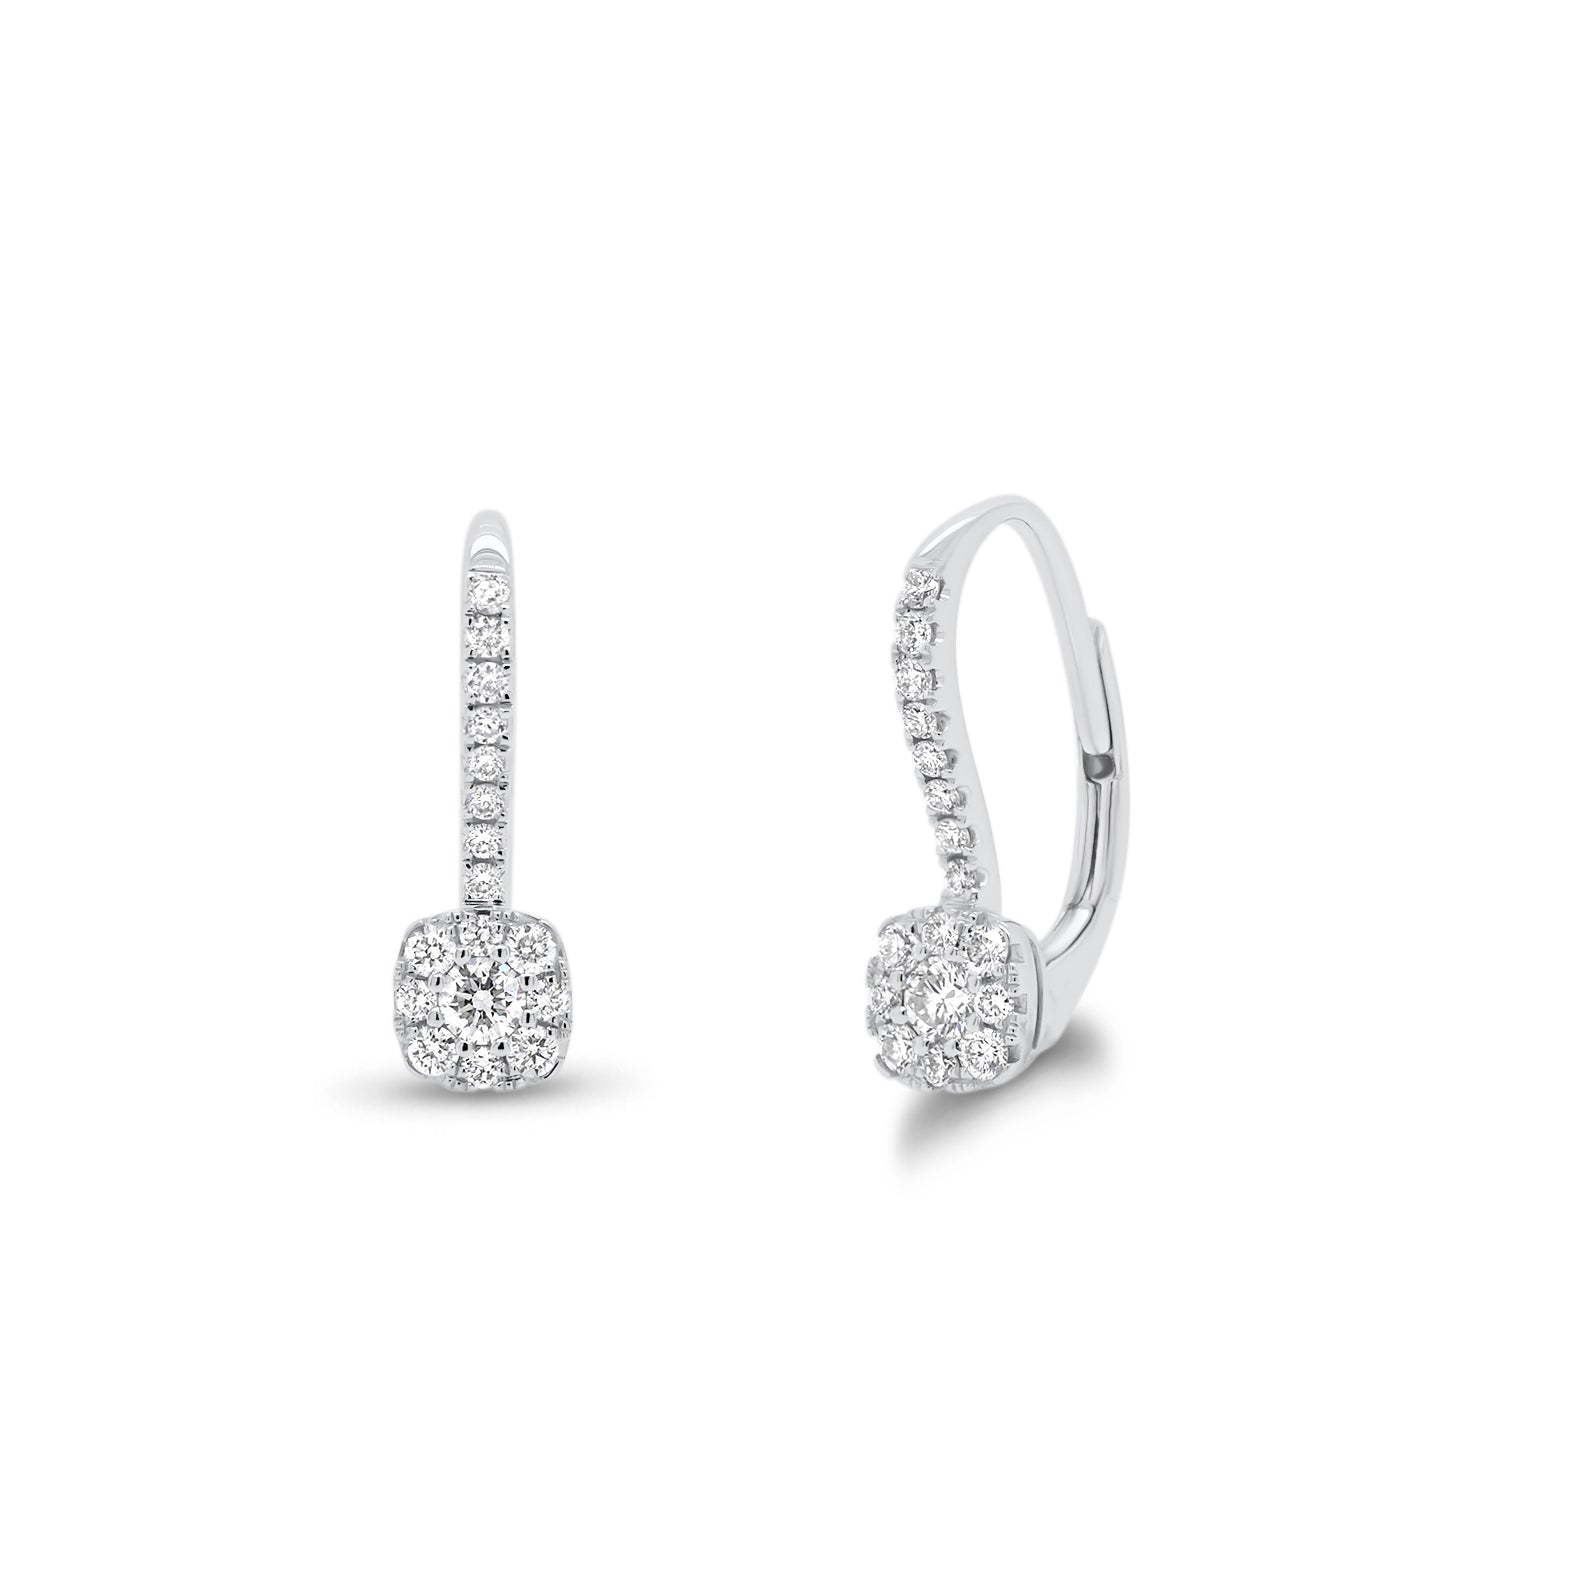 Diamond Cushion-Shaped Lever-Back Earrings  - 18K gold weighing 1.70 grams  - 34 round diamonds totaling 0.32 carats